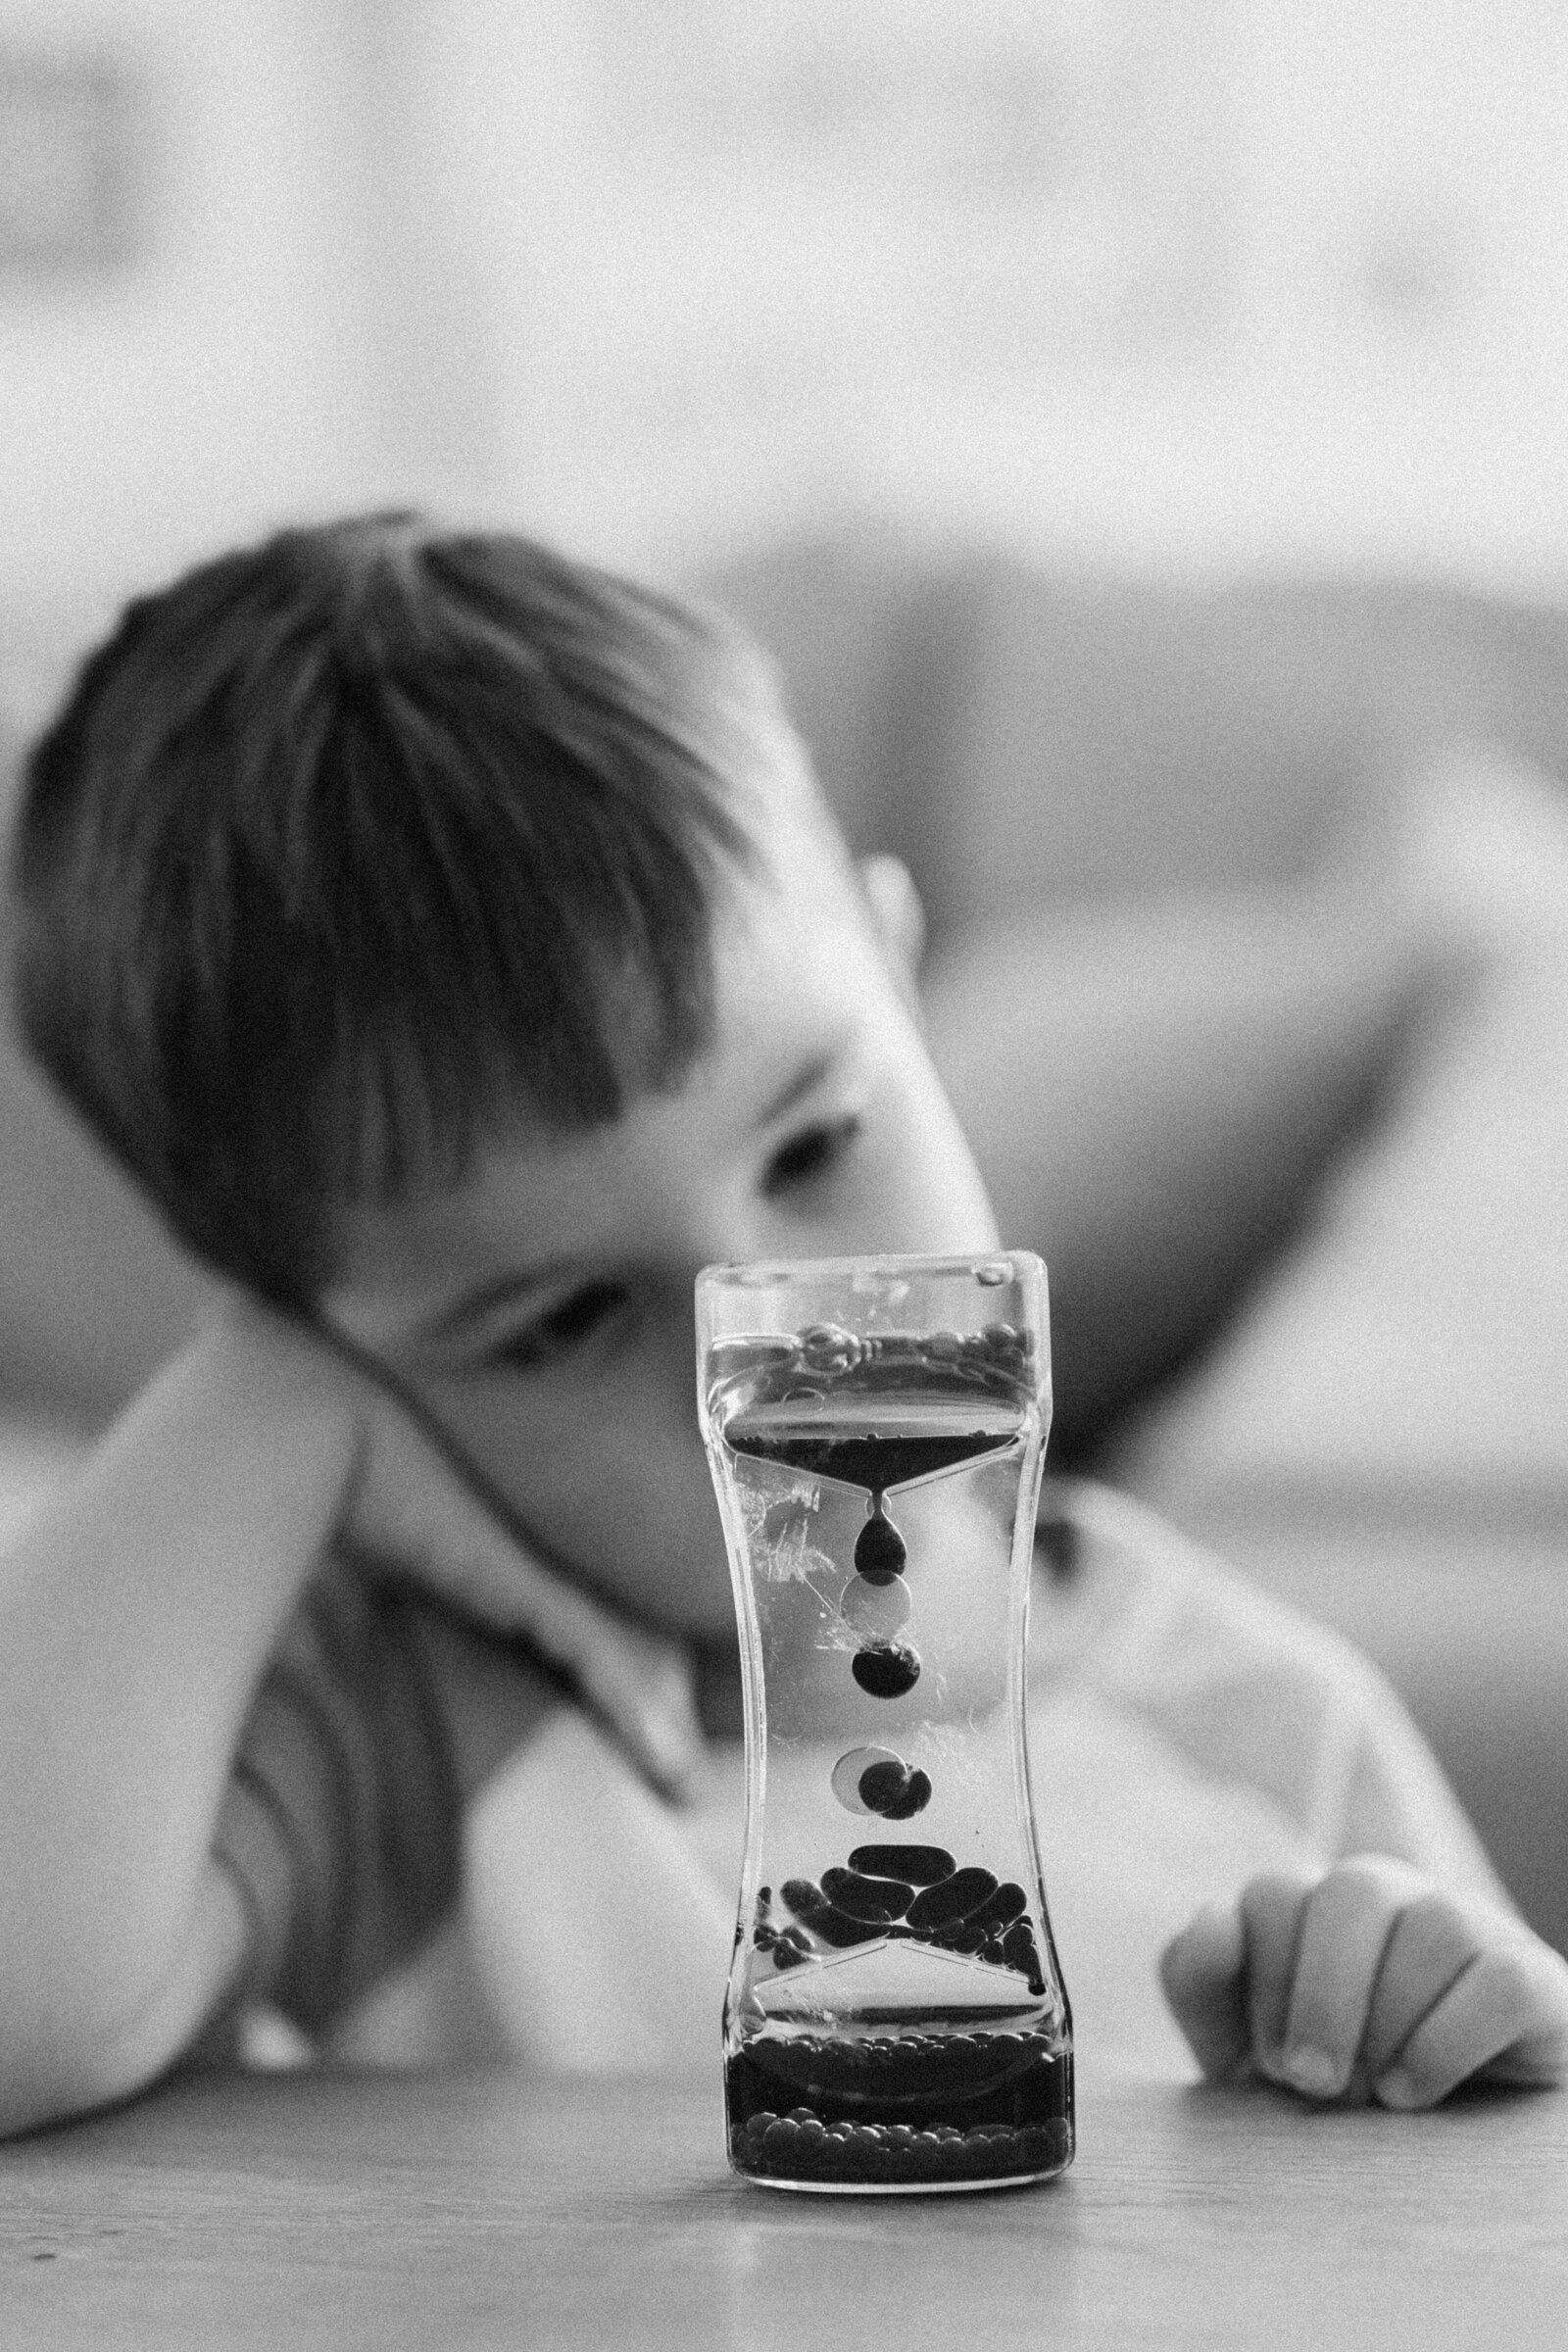 A little boy stares at an hourglass with his head resting in his hands